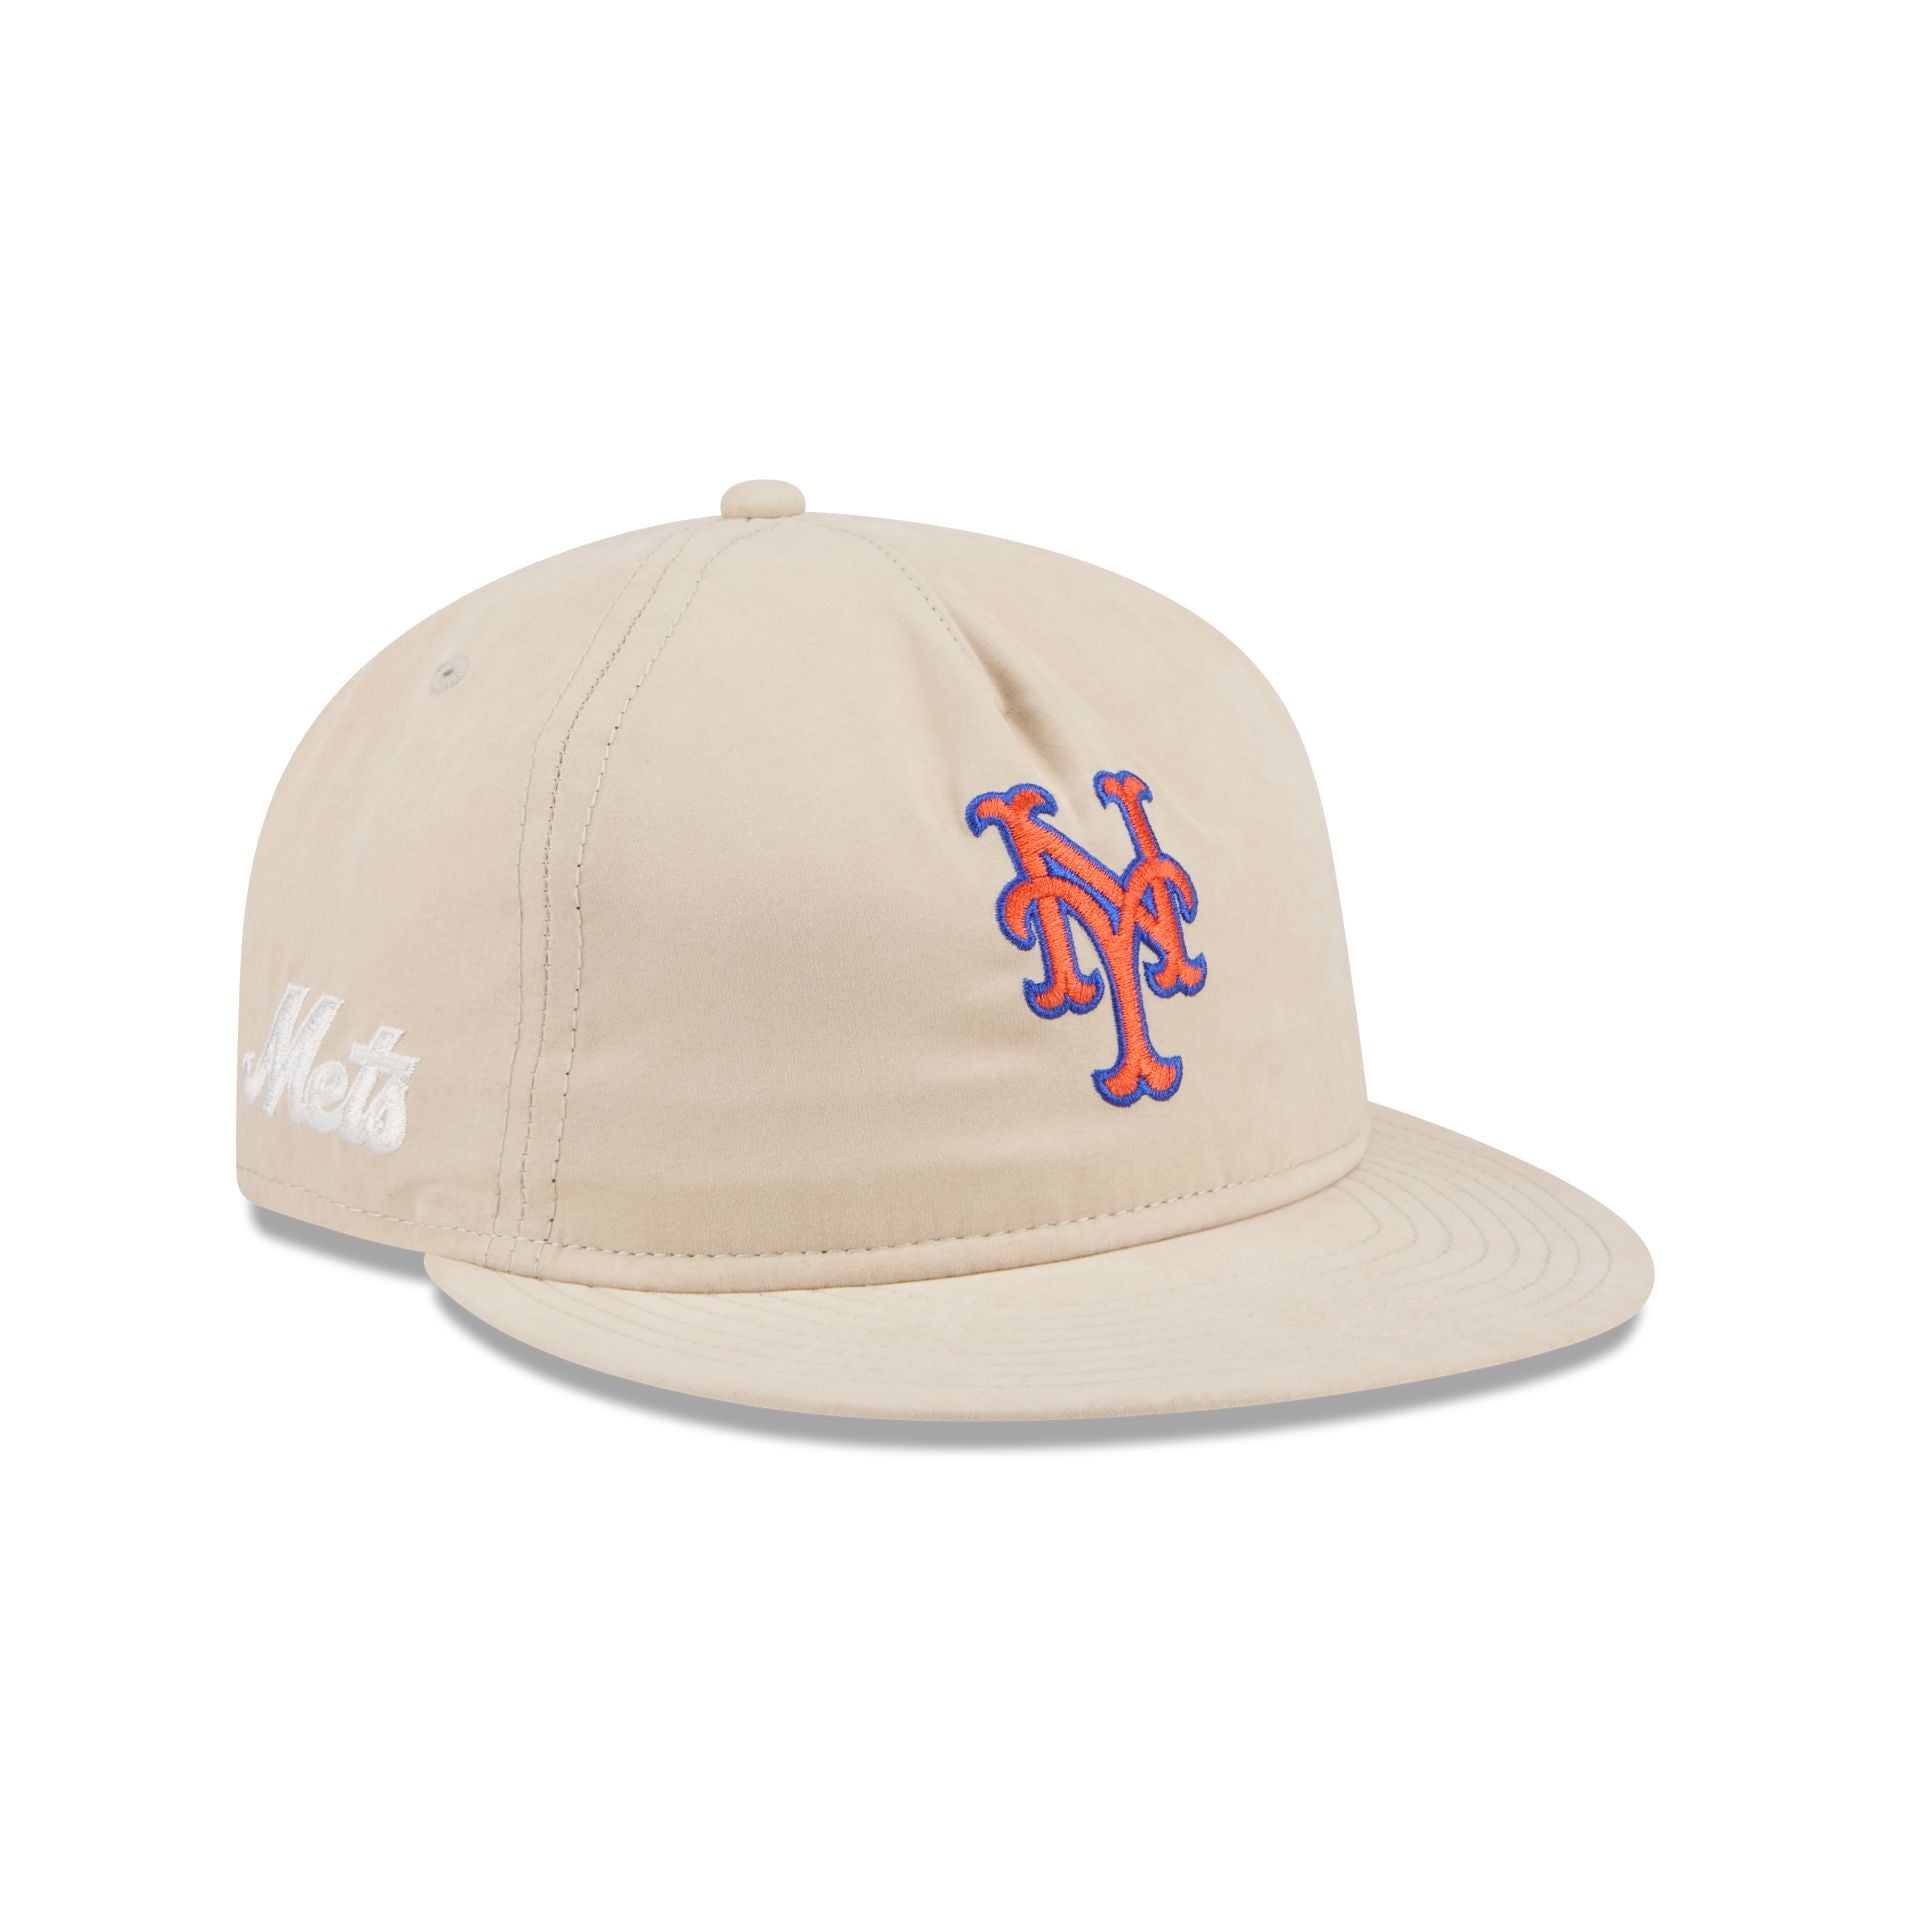 New York Mets Brushed Nylon Retro Crown 9FIFTY Adjustable – New 